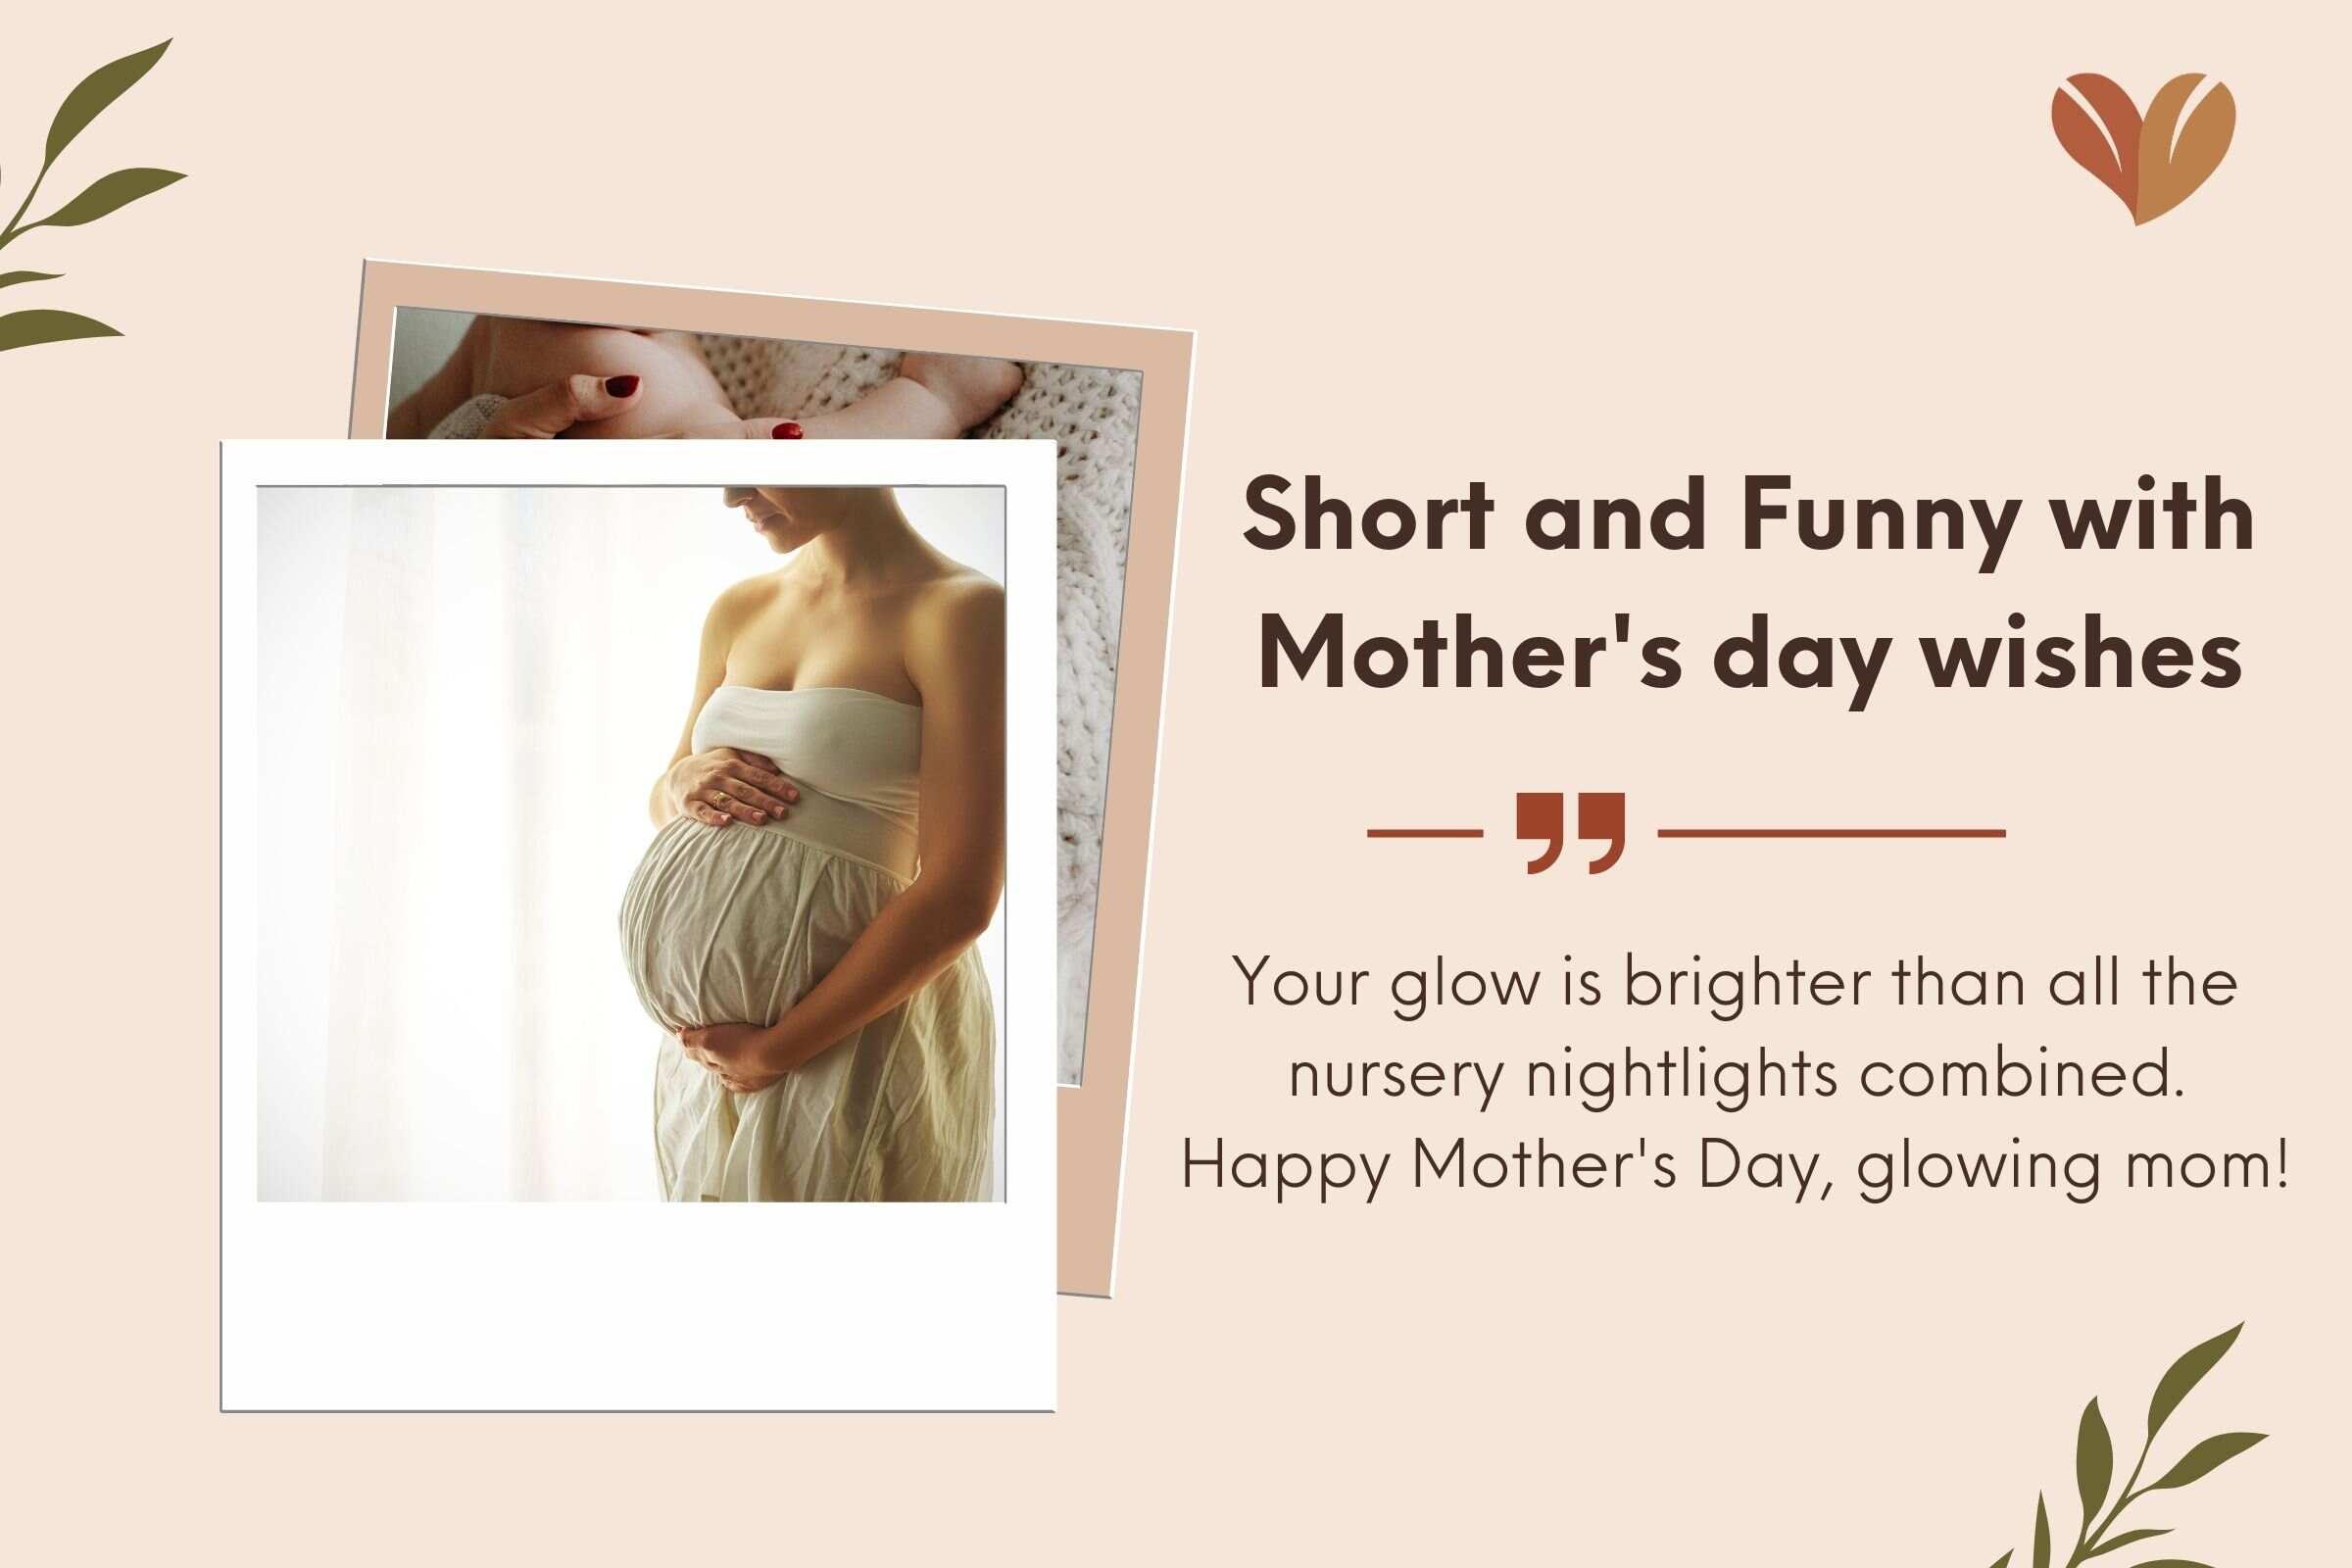 Short and Funny with Mother's day wishes for expecting moms